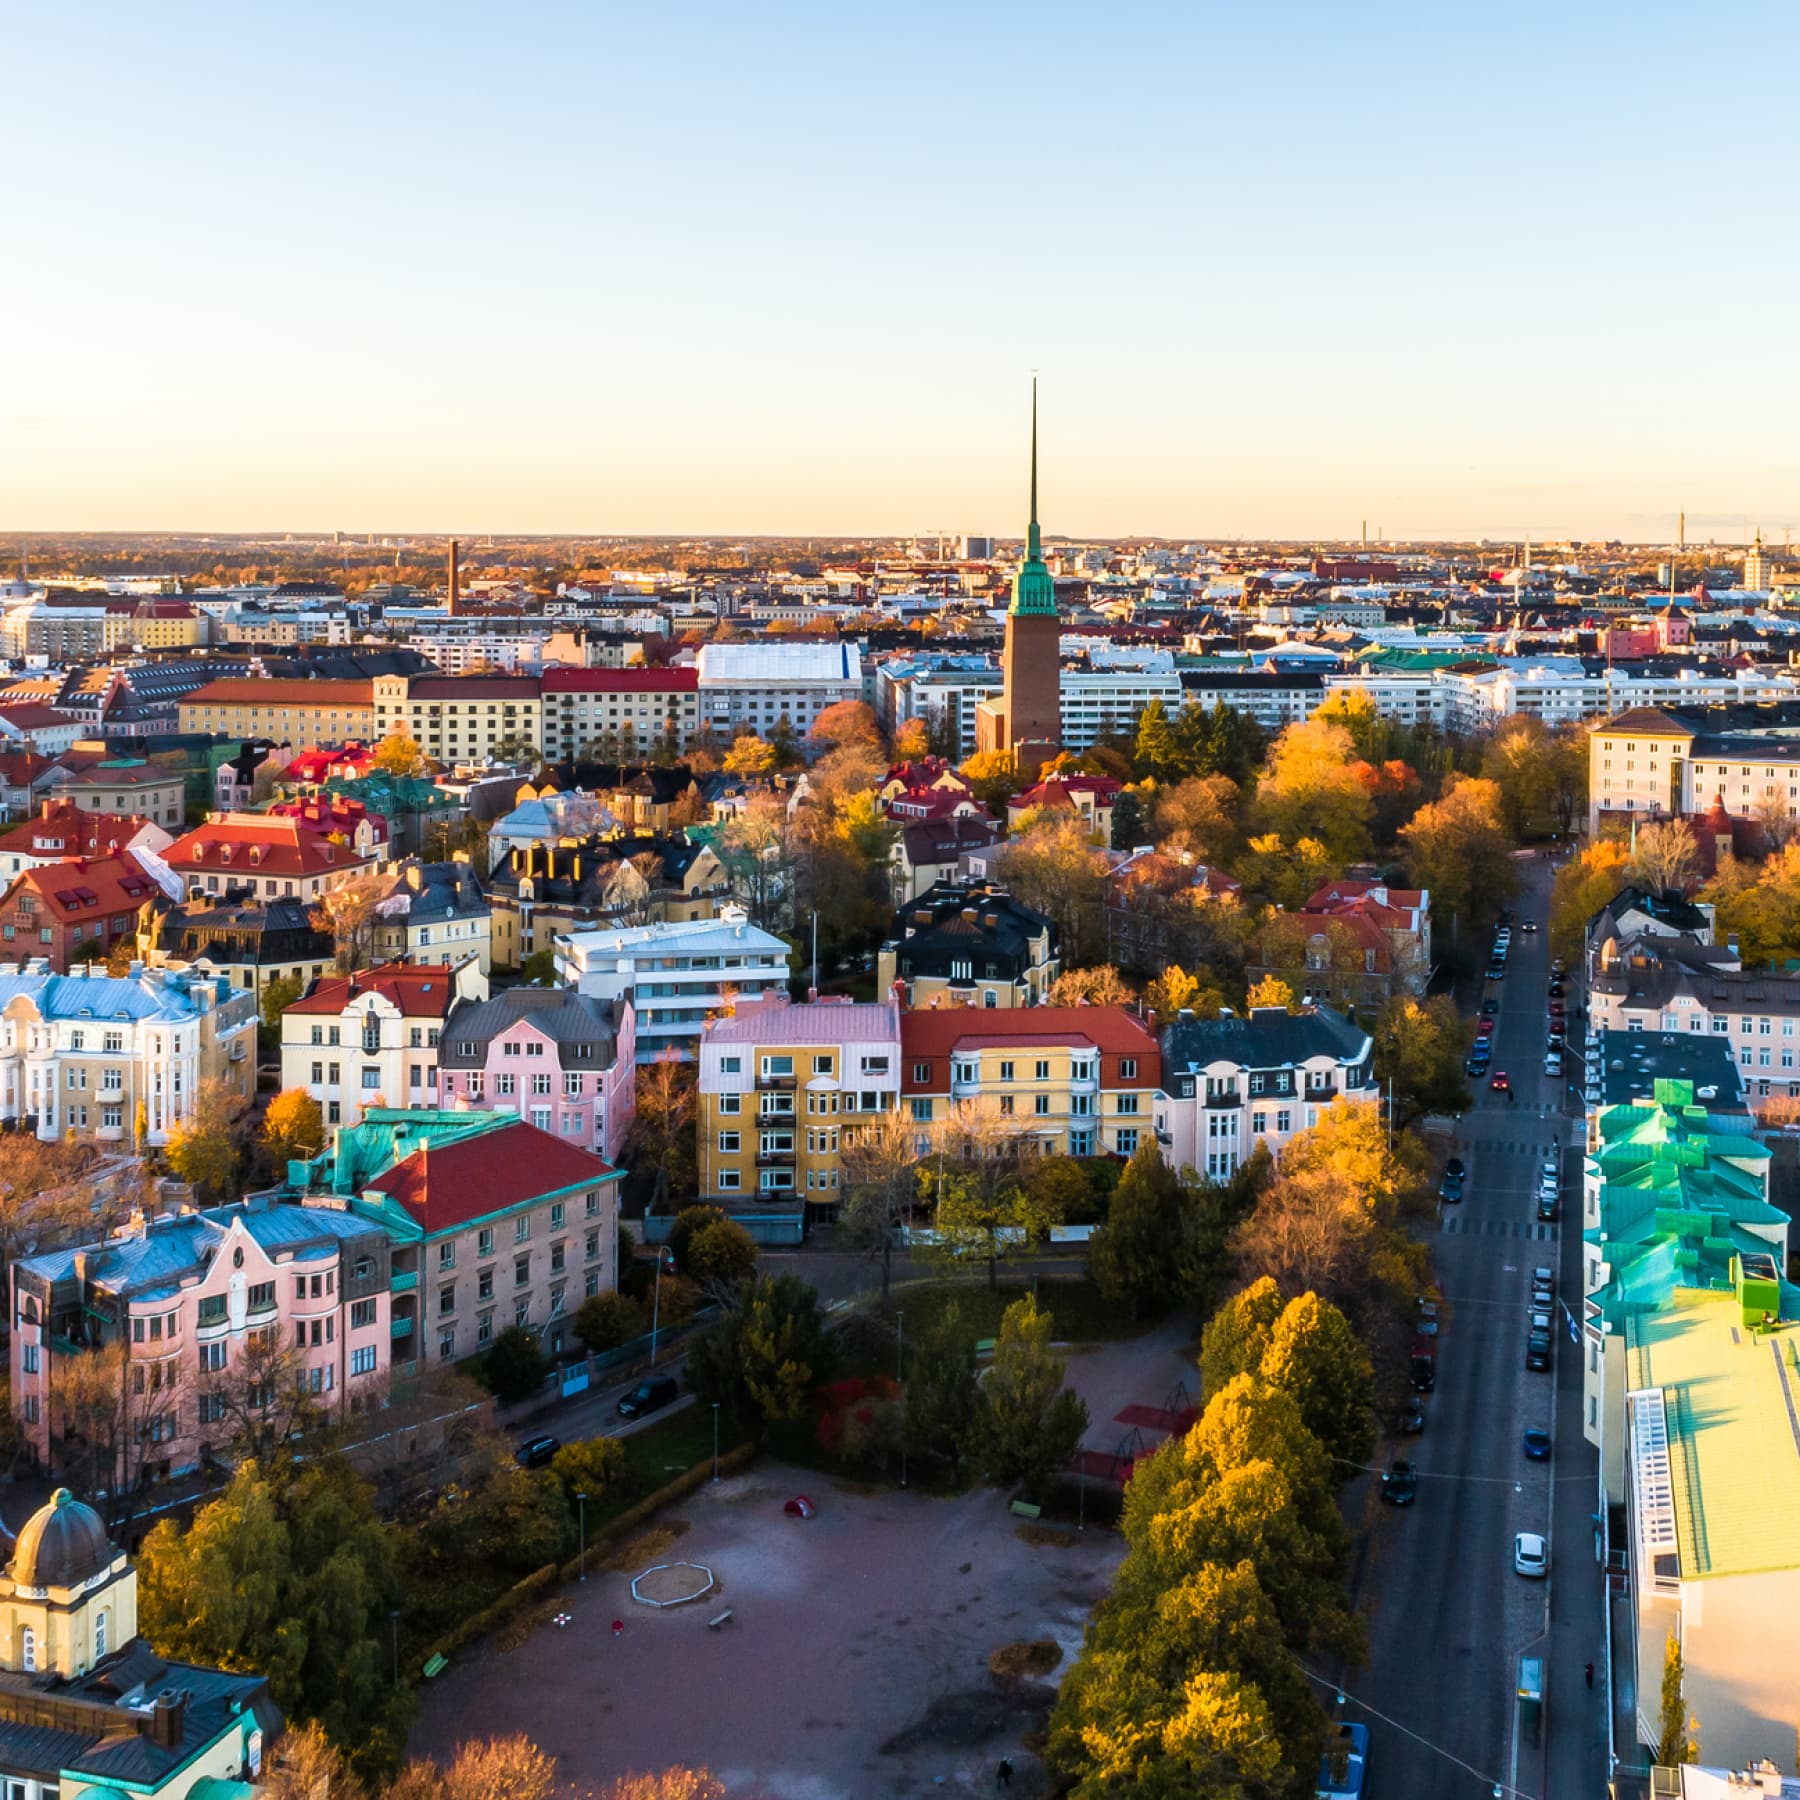 The Finnish capital is a hard hitter when it comes to considering romantic city breaks